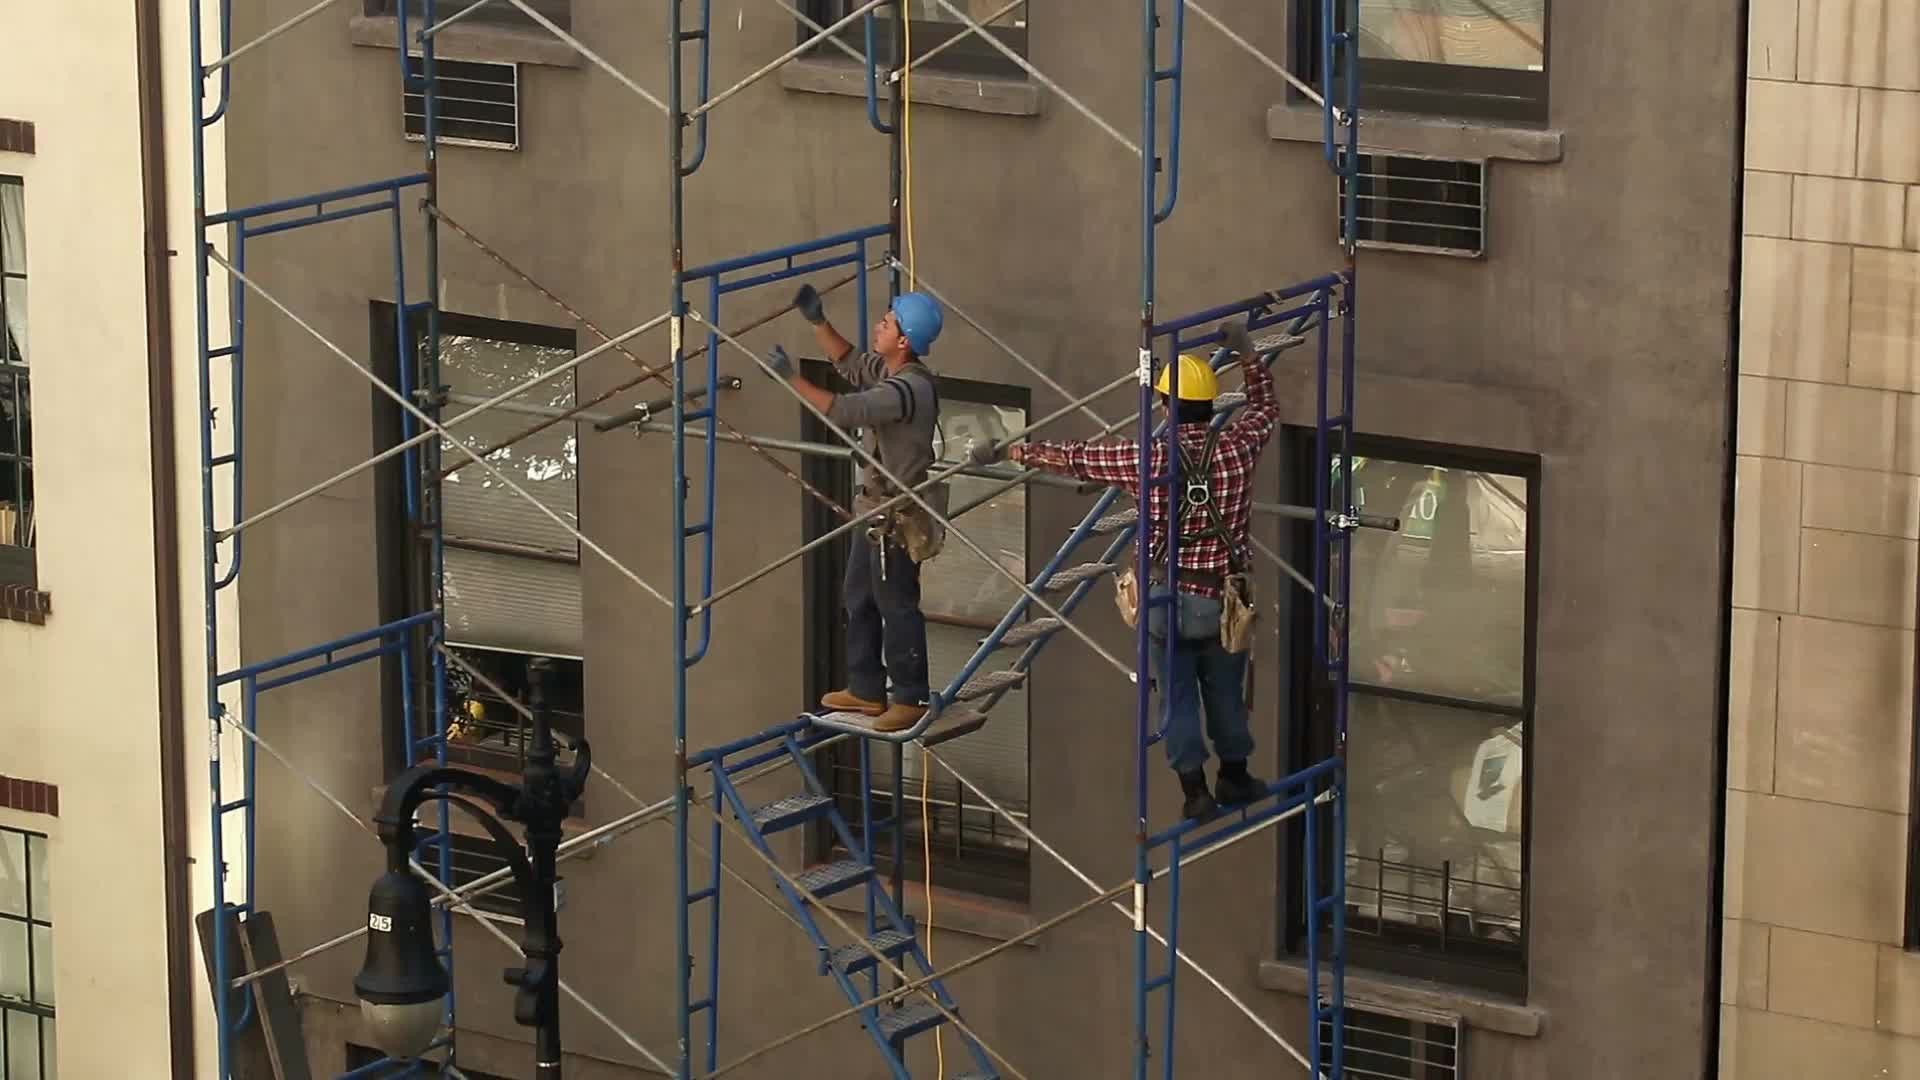 construction workers in hardhats on scaffolding - man doing pull-ups on his break in NYC